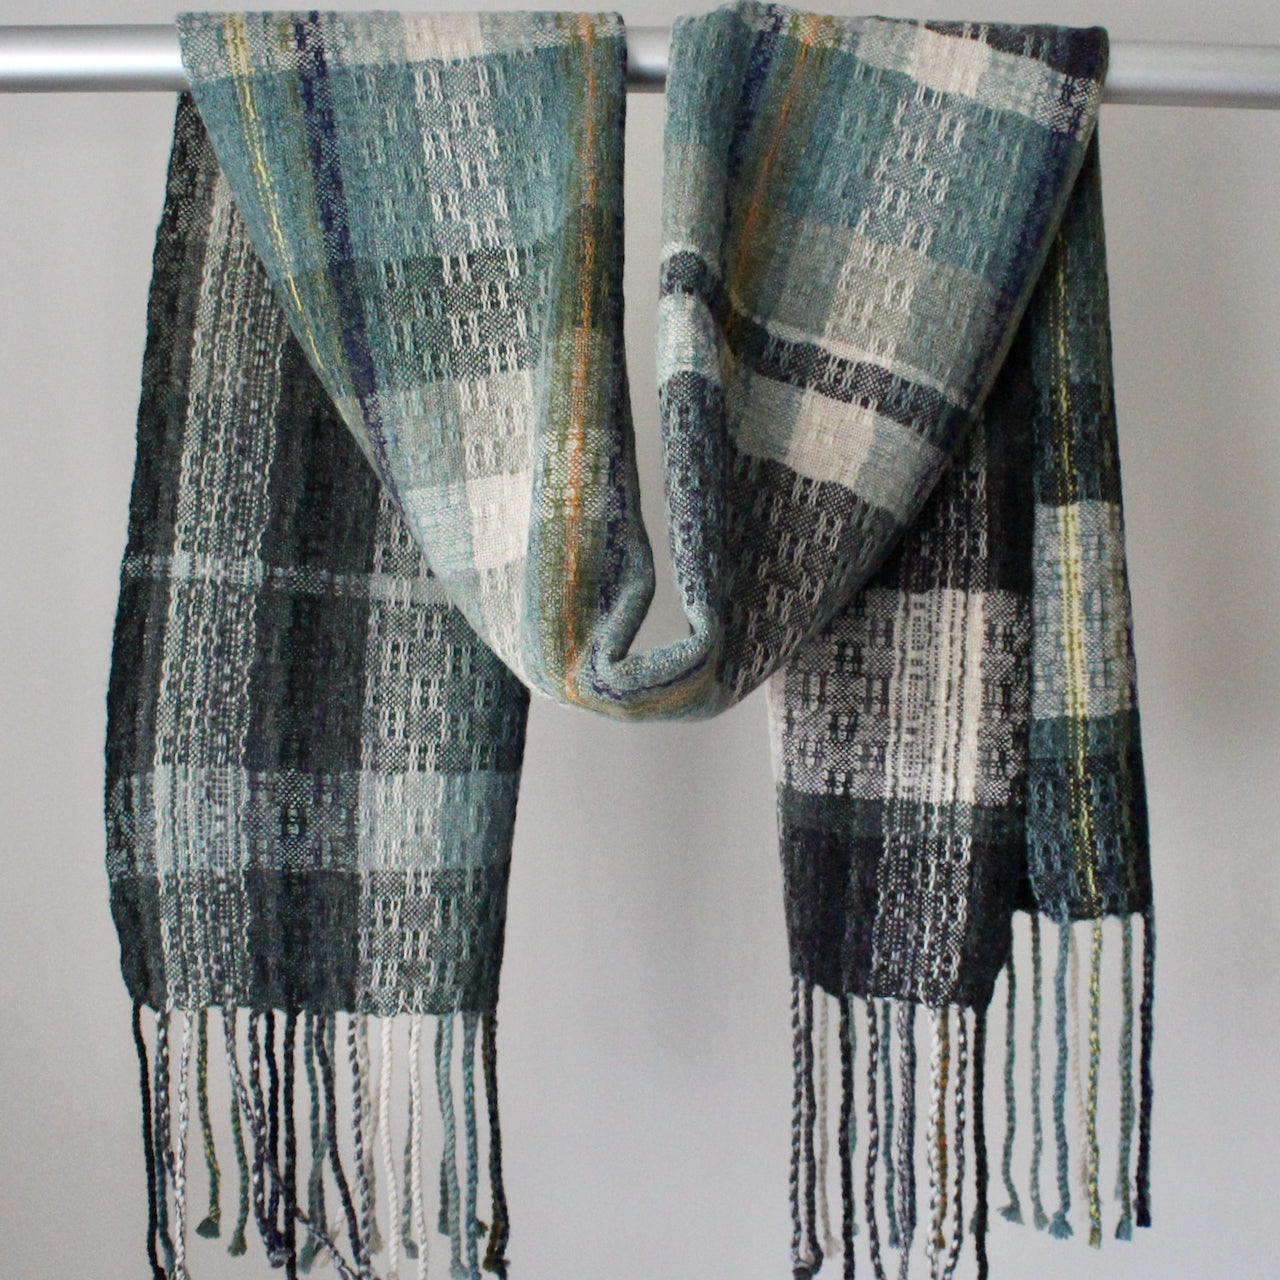 Cornish textile designer Teresa Dunne's handwoven scarf in blues, greens and greys.